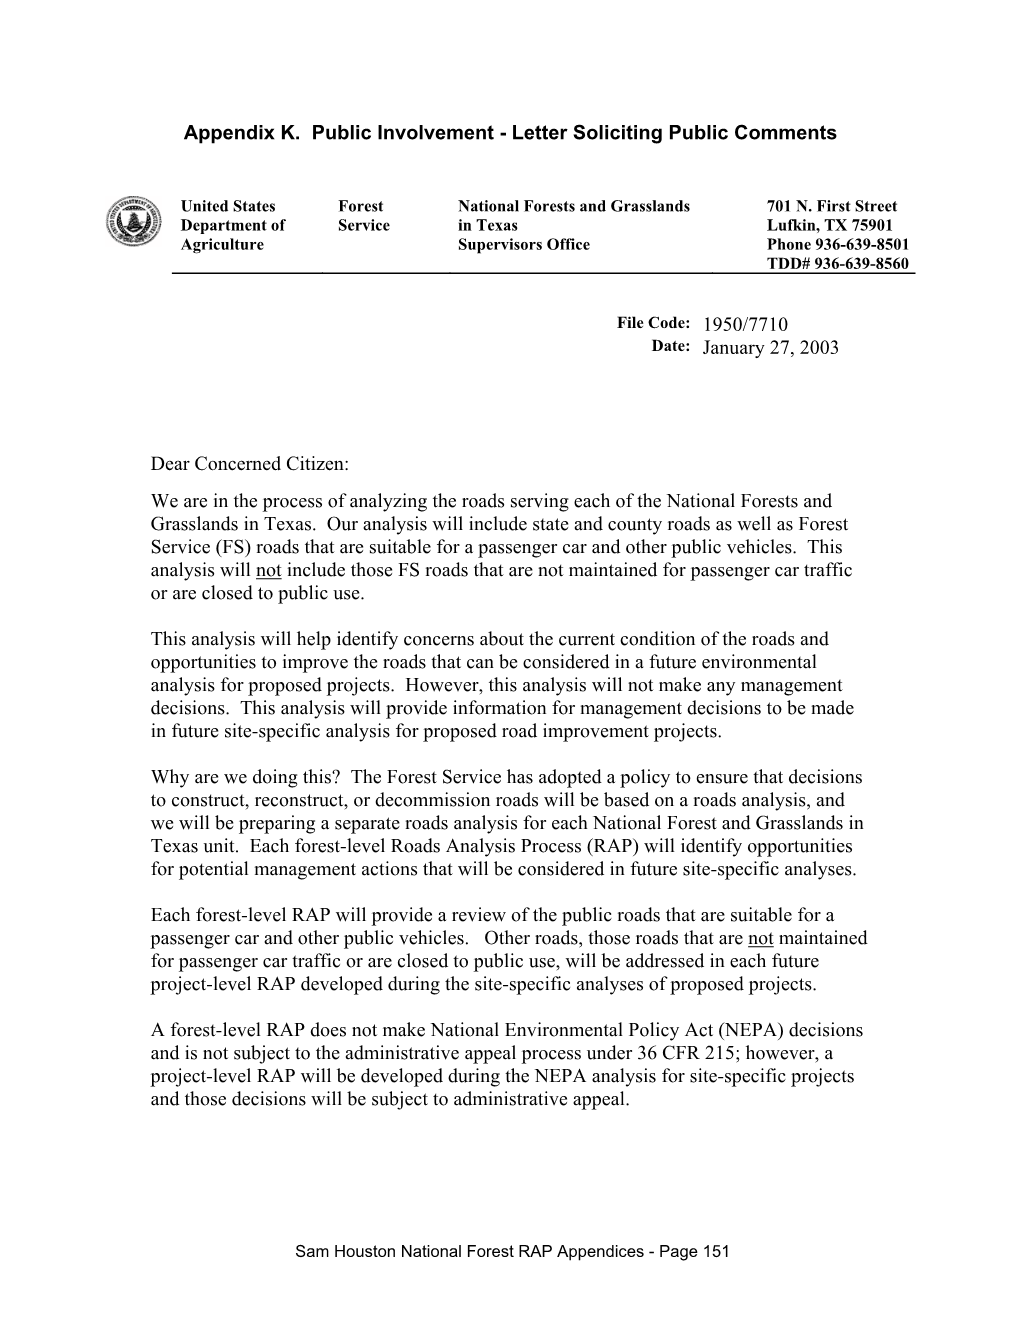 Letter Soliciting Public Comments Date: January 27, 2003 Dear Concerned Citizen